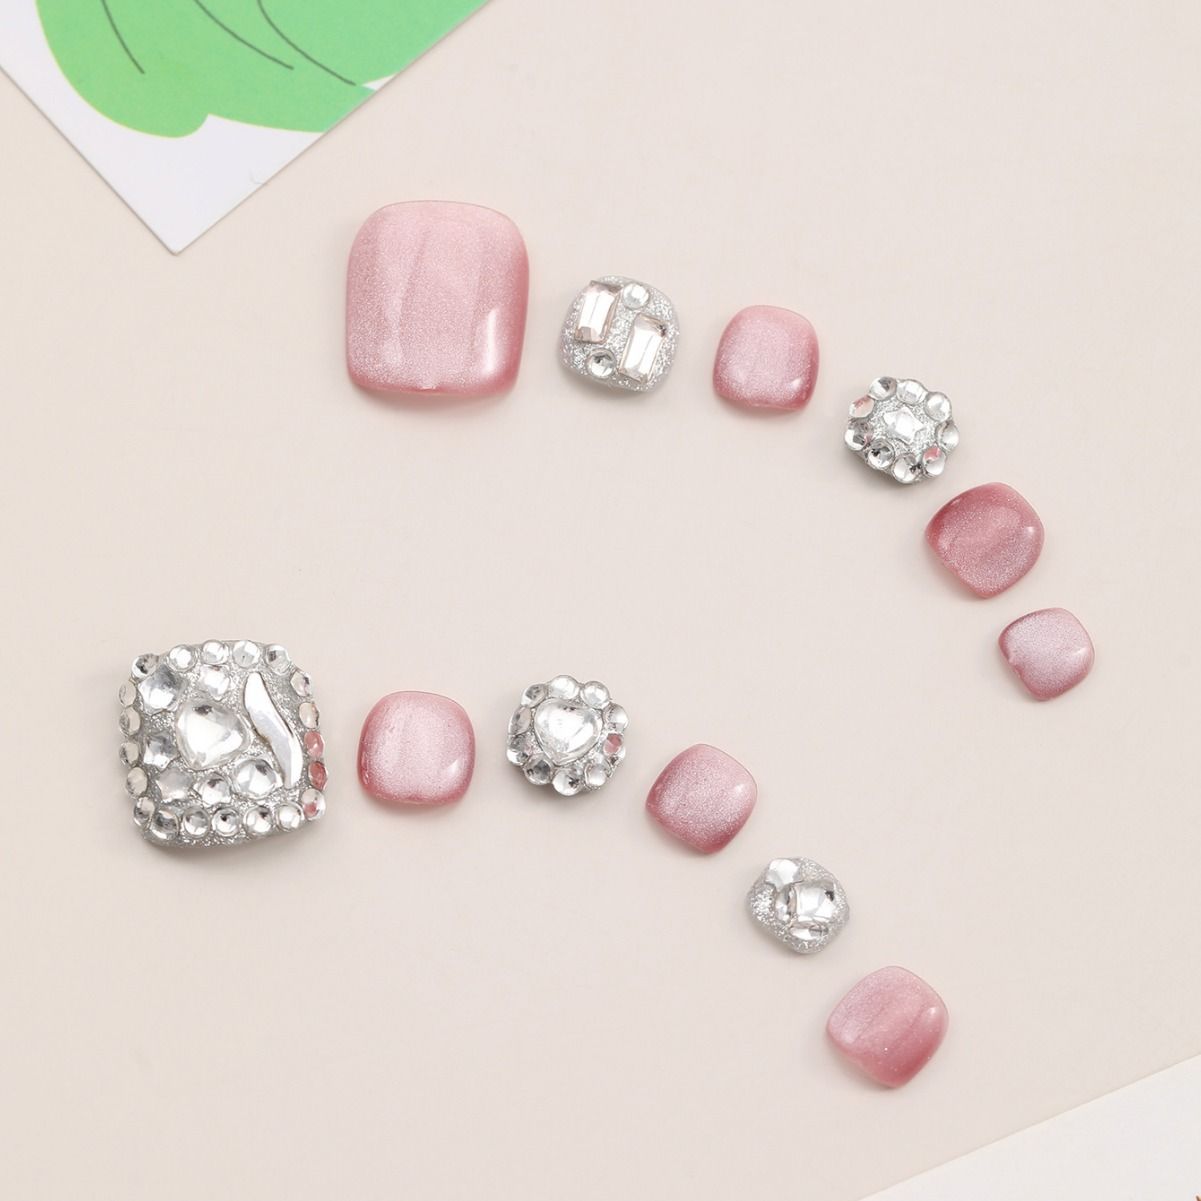 Cheap price European and American ins pink cat's eye foot nails AB diamond stickers and diamond babes wear nails artificial press on toe nails Wholesale Price Supplier Factory Manufactory